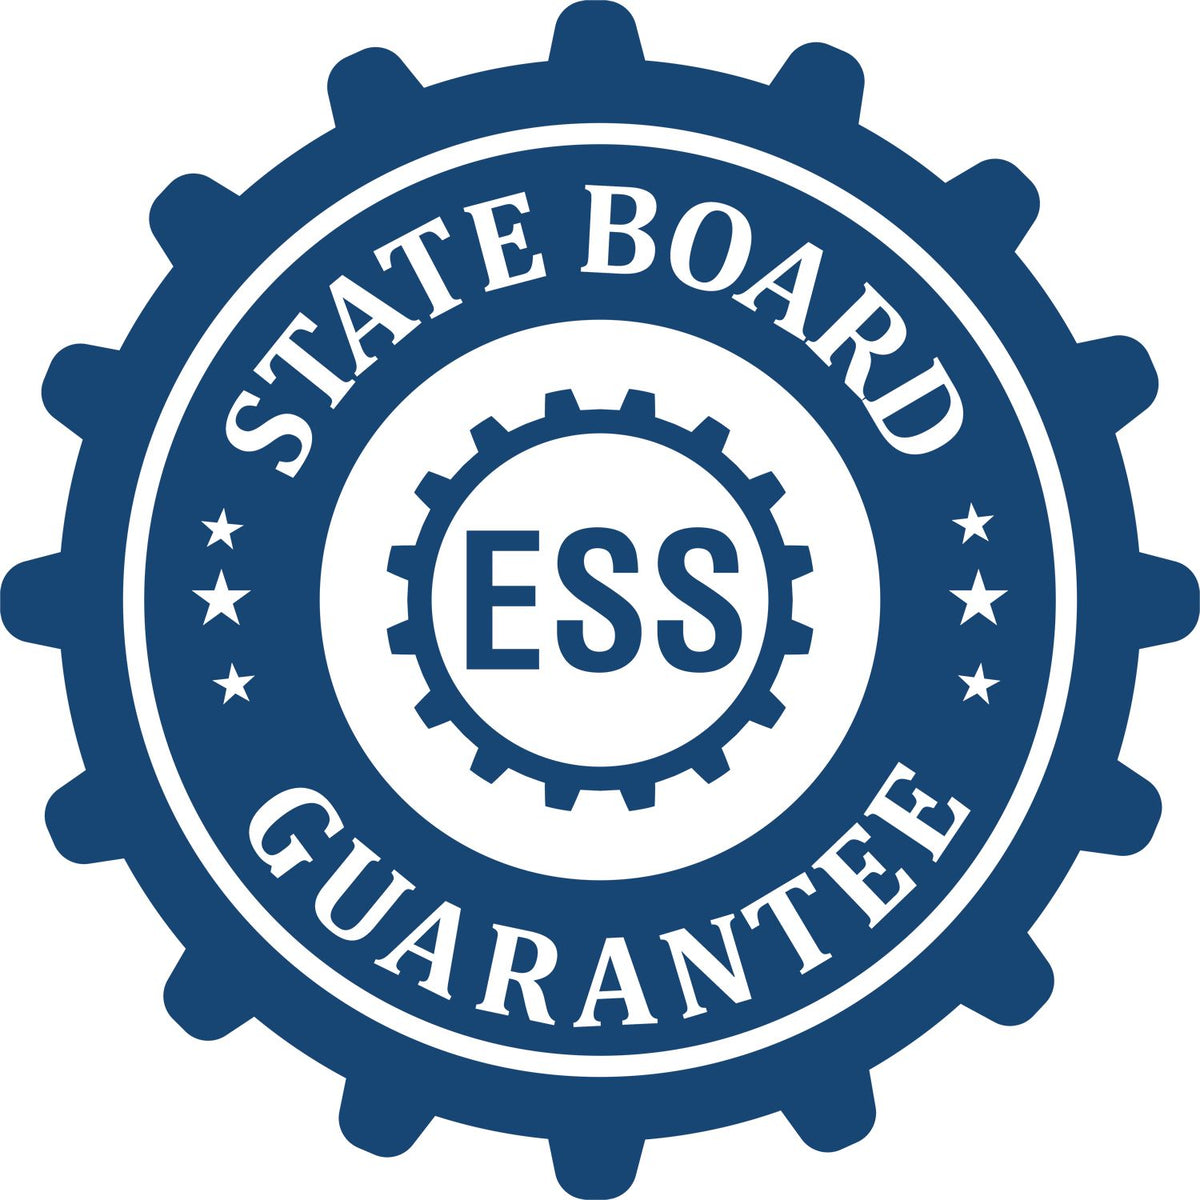 An emblem in a gear shape illustrating a state board guarantee for the Wooden Handle Wyoming Rectangular Notary Public Stamp product.